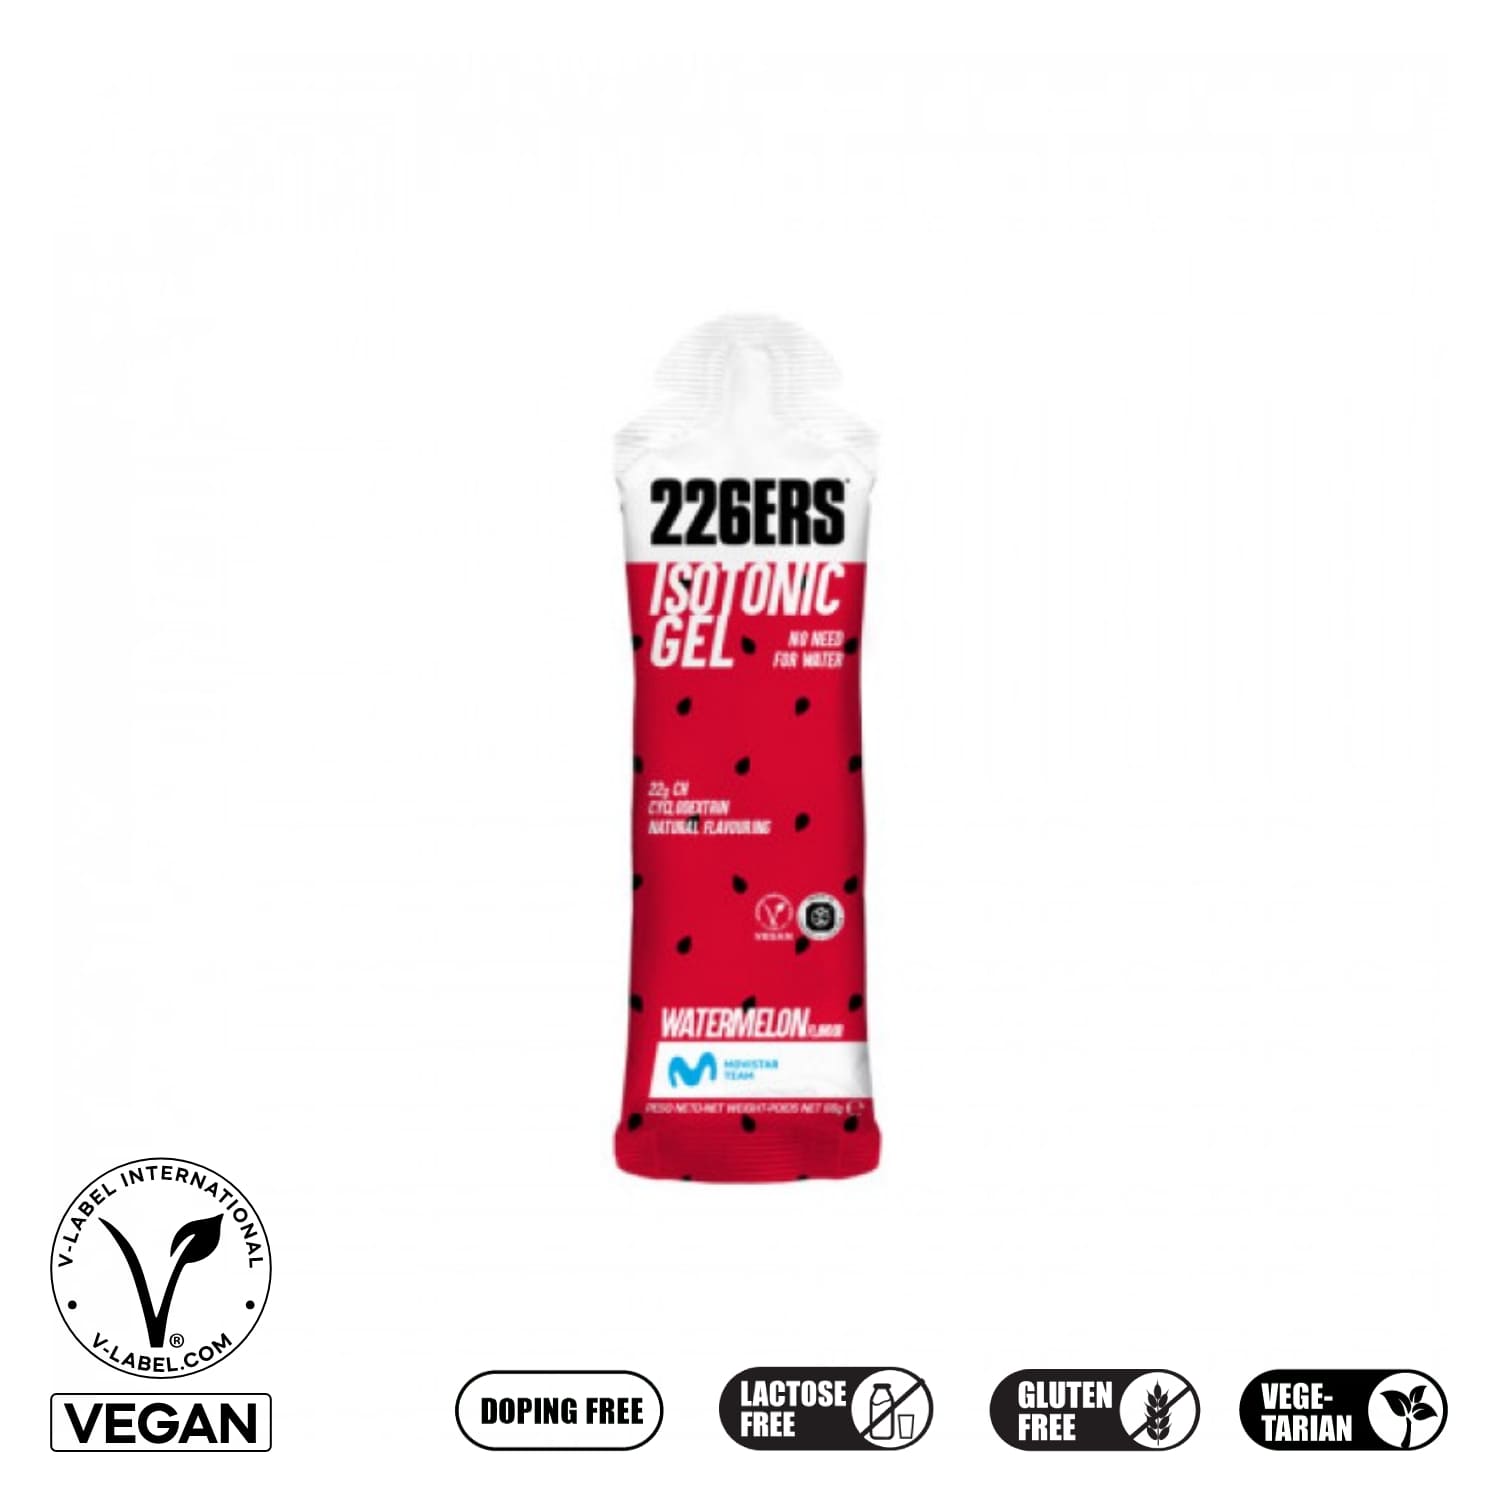 226ers_isotonic drink_watermelon